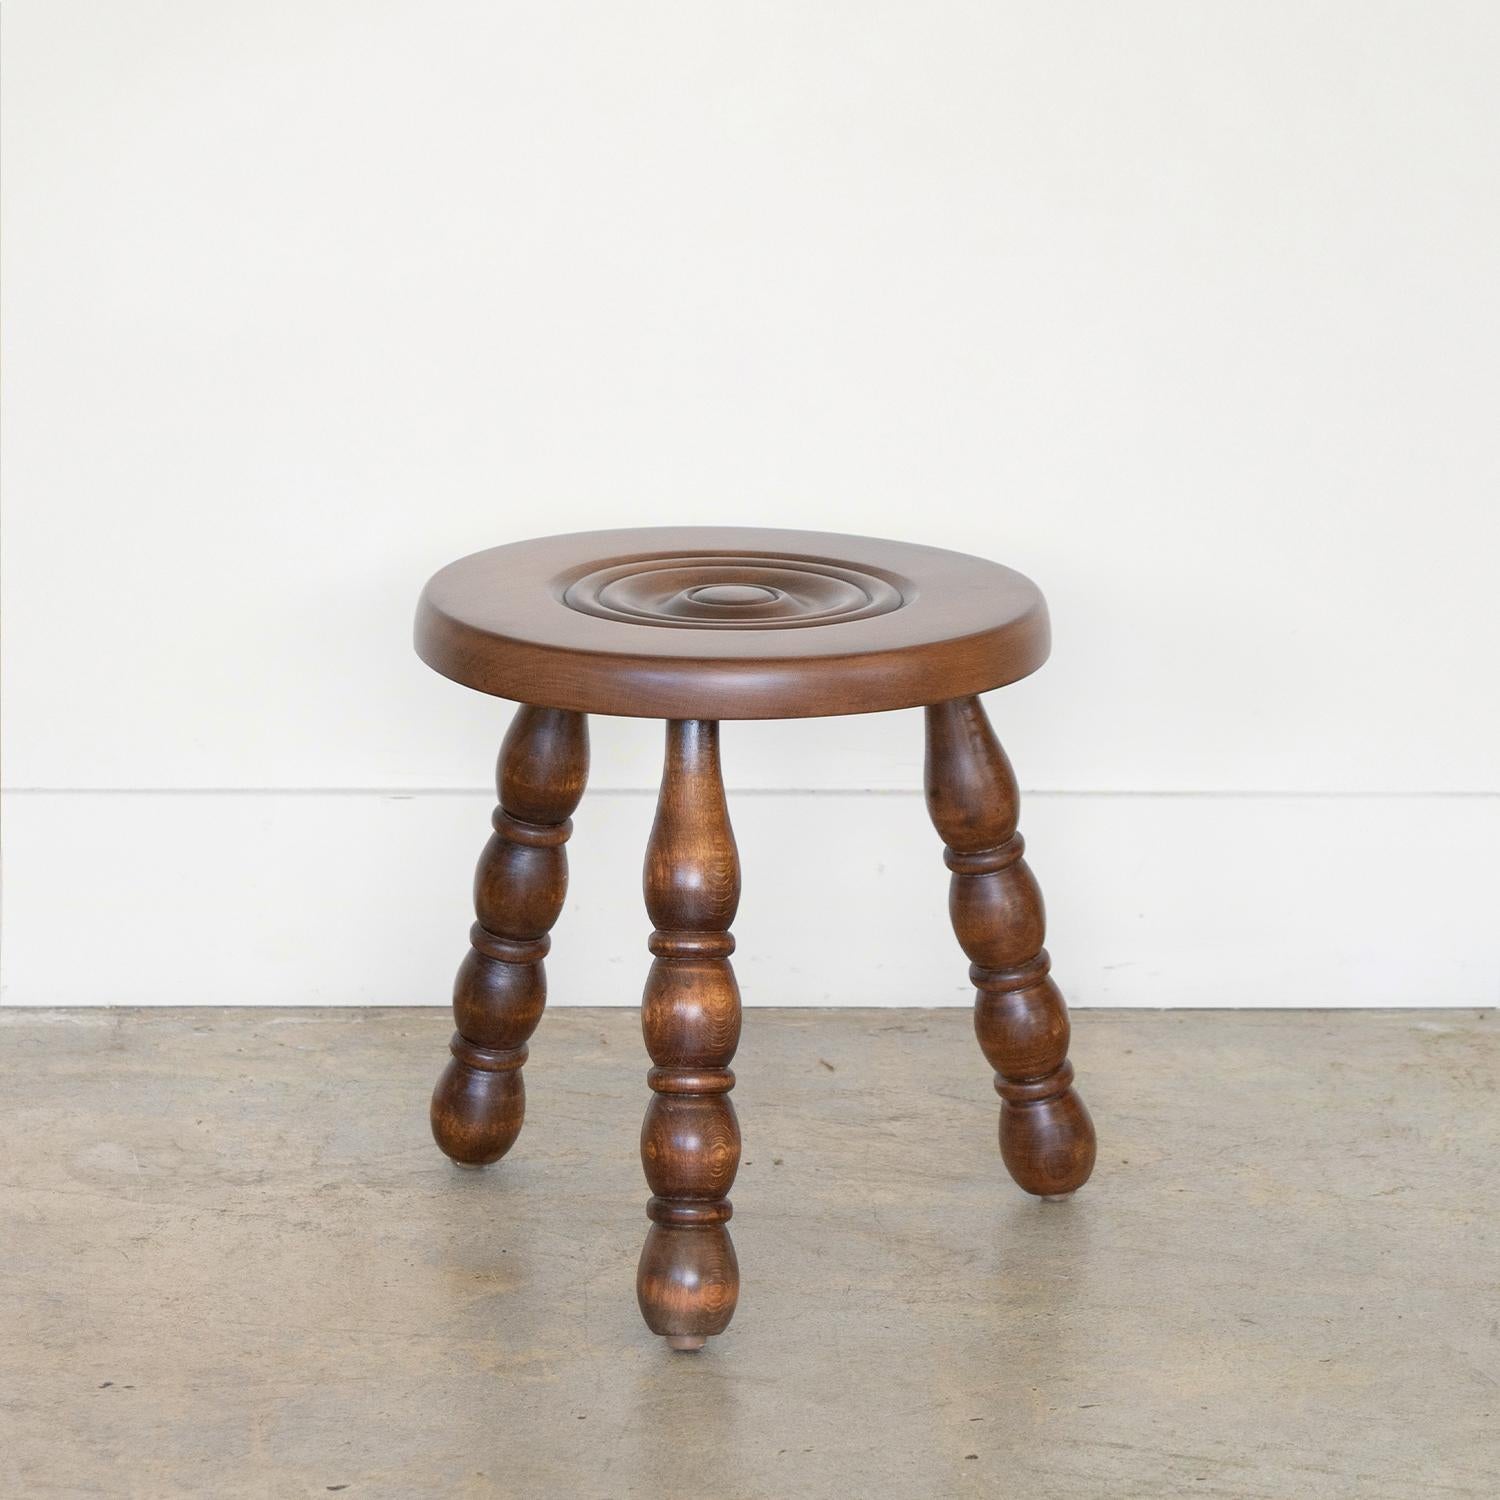 Vintage short wood stool with beautiful chunky carved wood legs from France. Circular seat with carved ring detail on top. Newly refinished in a medium stain. Can be used as stool or as side table next to chairs. 

